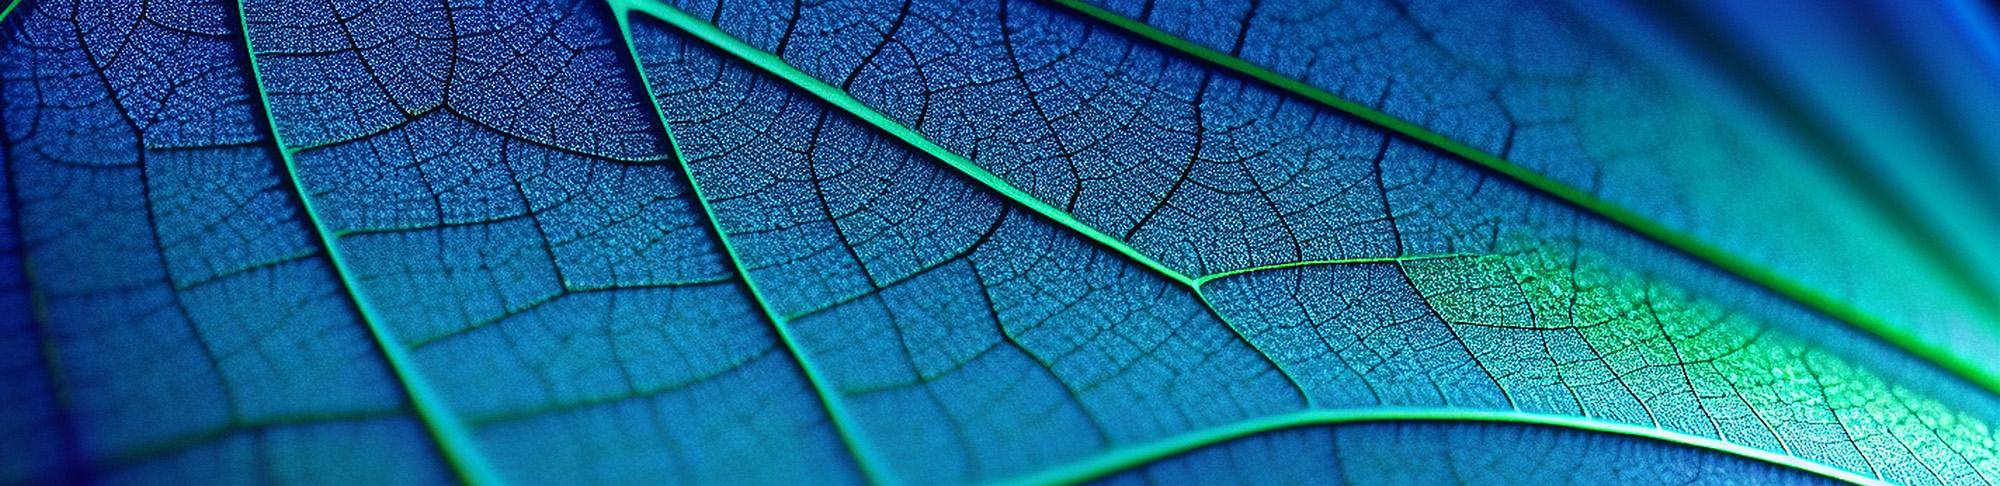 Earth Day Banner showing texture of a leaf under a microscope